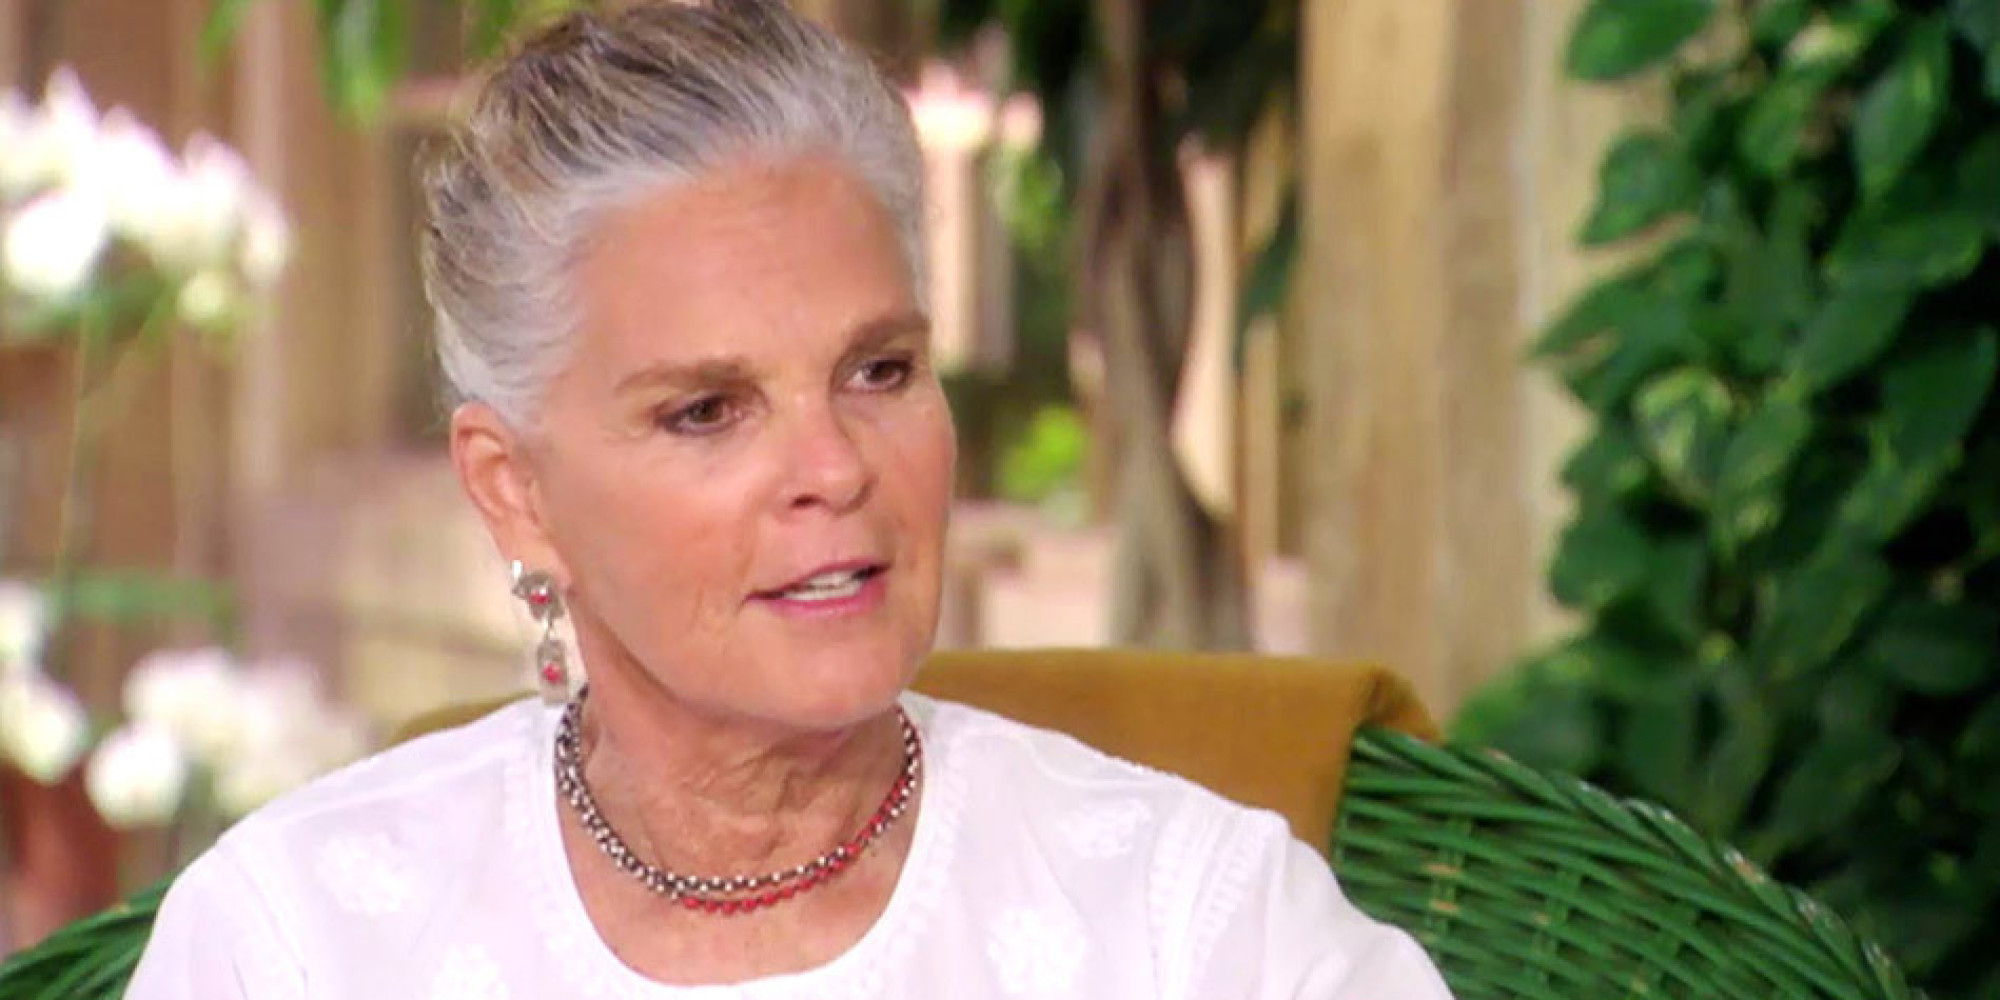 The 'Exorcism' Ali MacGraw Underwent On Her 65th Birthday (VIDEO